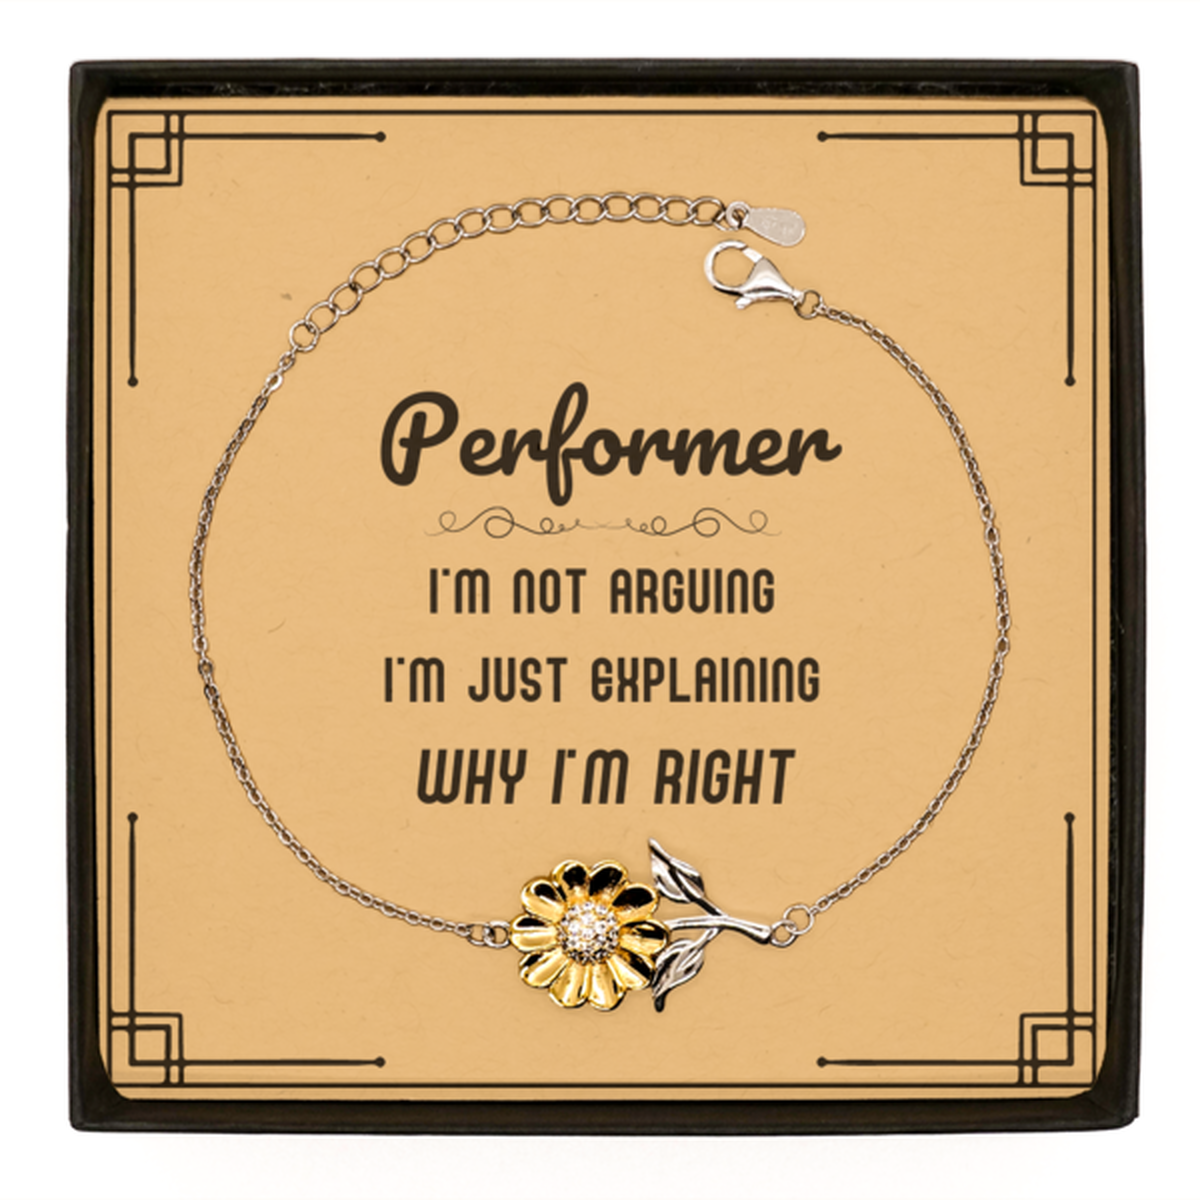 Performer I'm not Arguing. I'm Just Explaining Why I'm RIGHT Sunflower Bracelet, Funny Saying Quote Performer Gifts For Performer Message Card Graduation Birthday Christmas Gifts for Men Women Coworker